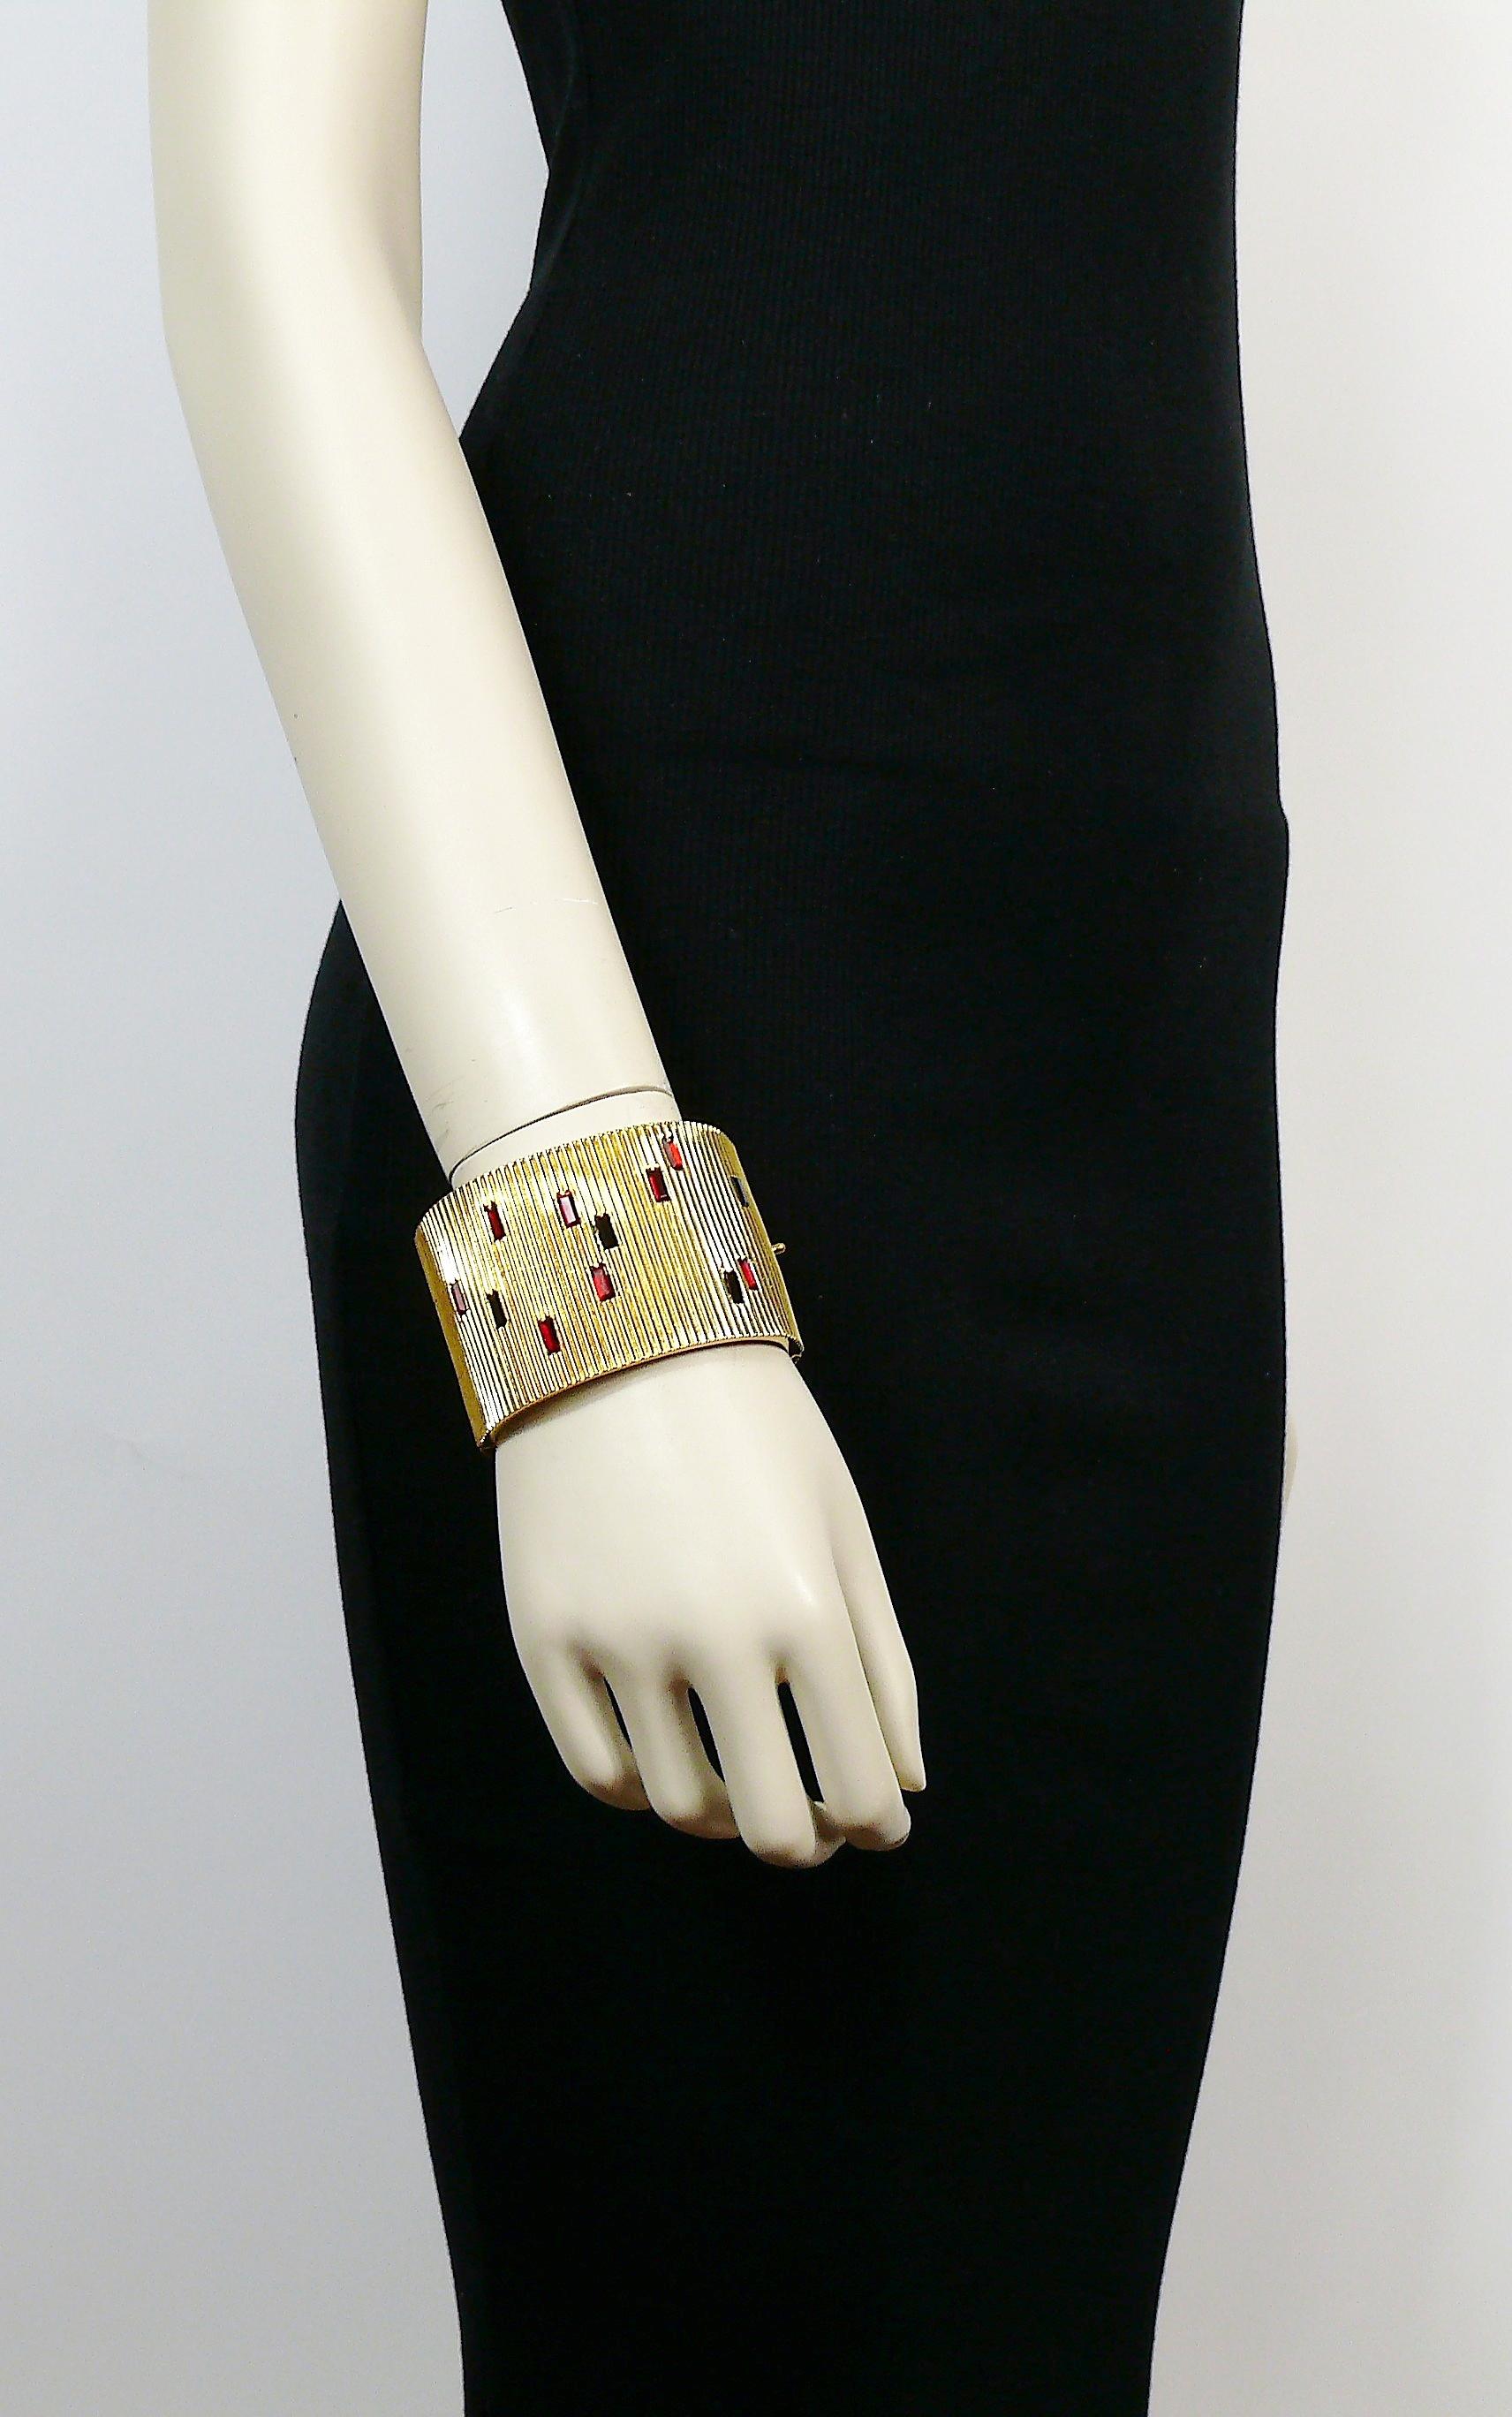 PALOM PICASSO Parfums vintage gold toned ribbed design wide cuff bracelet embellished with ruby and jet black baguette shaped crystals.

Secure clasp closure.

Marked PALOMA PICASSO PARFUMS.

Made in France.

Indicative measurements : inner length